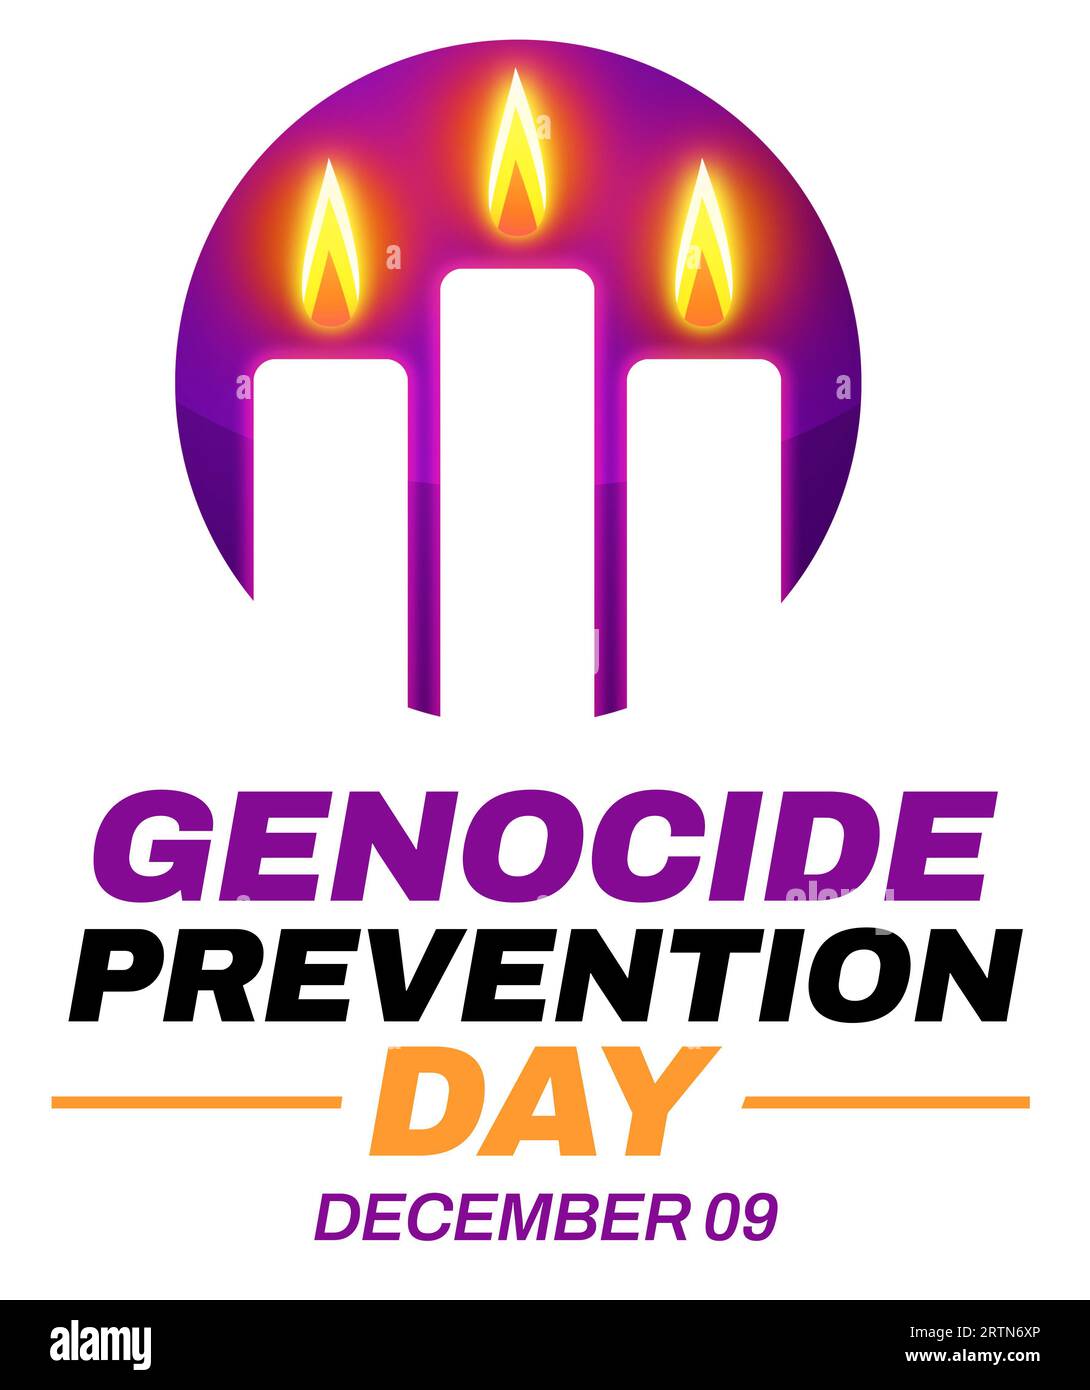 December 9 is observed as Genocide Prevention Day globally, background design with glowing candles and typography under it. Stock Photo